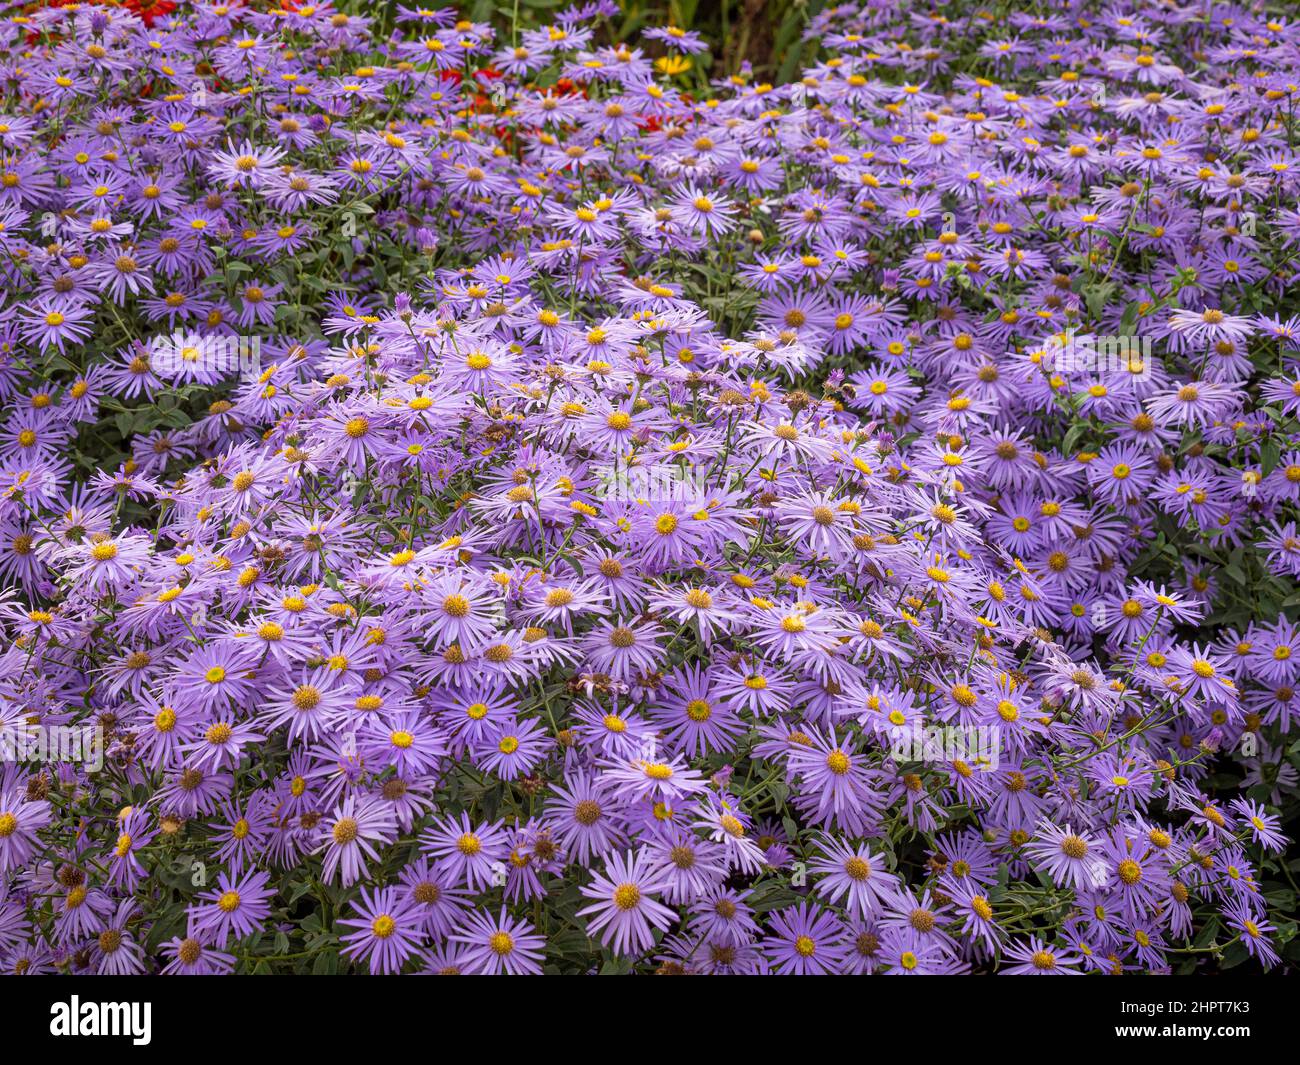 Mauve coloured flowers of Aster x frikartii 'Mönch' growing in a UK garden. Stock Photo